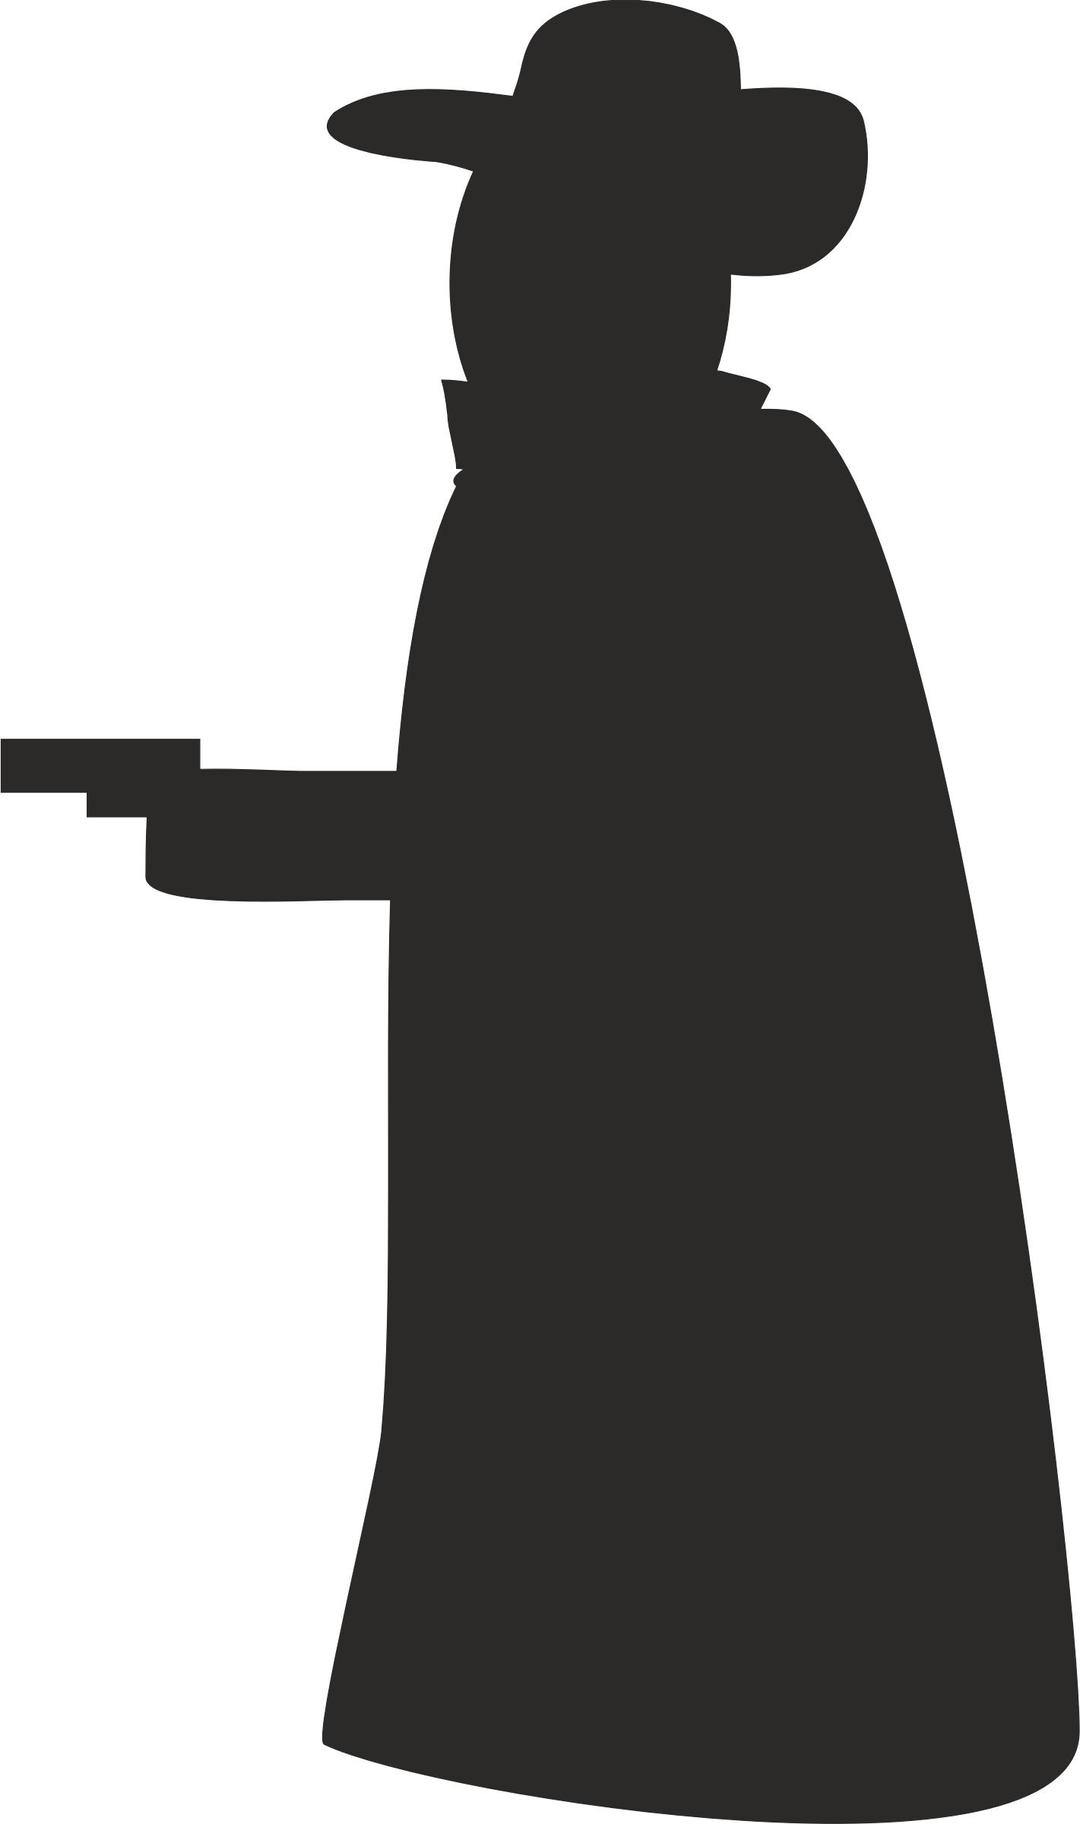 Robber with gun silhouette png transparent